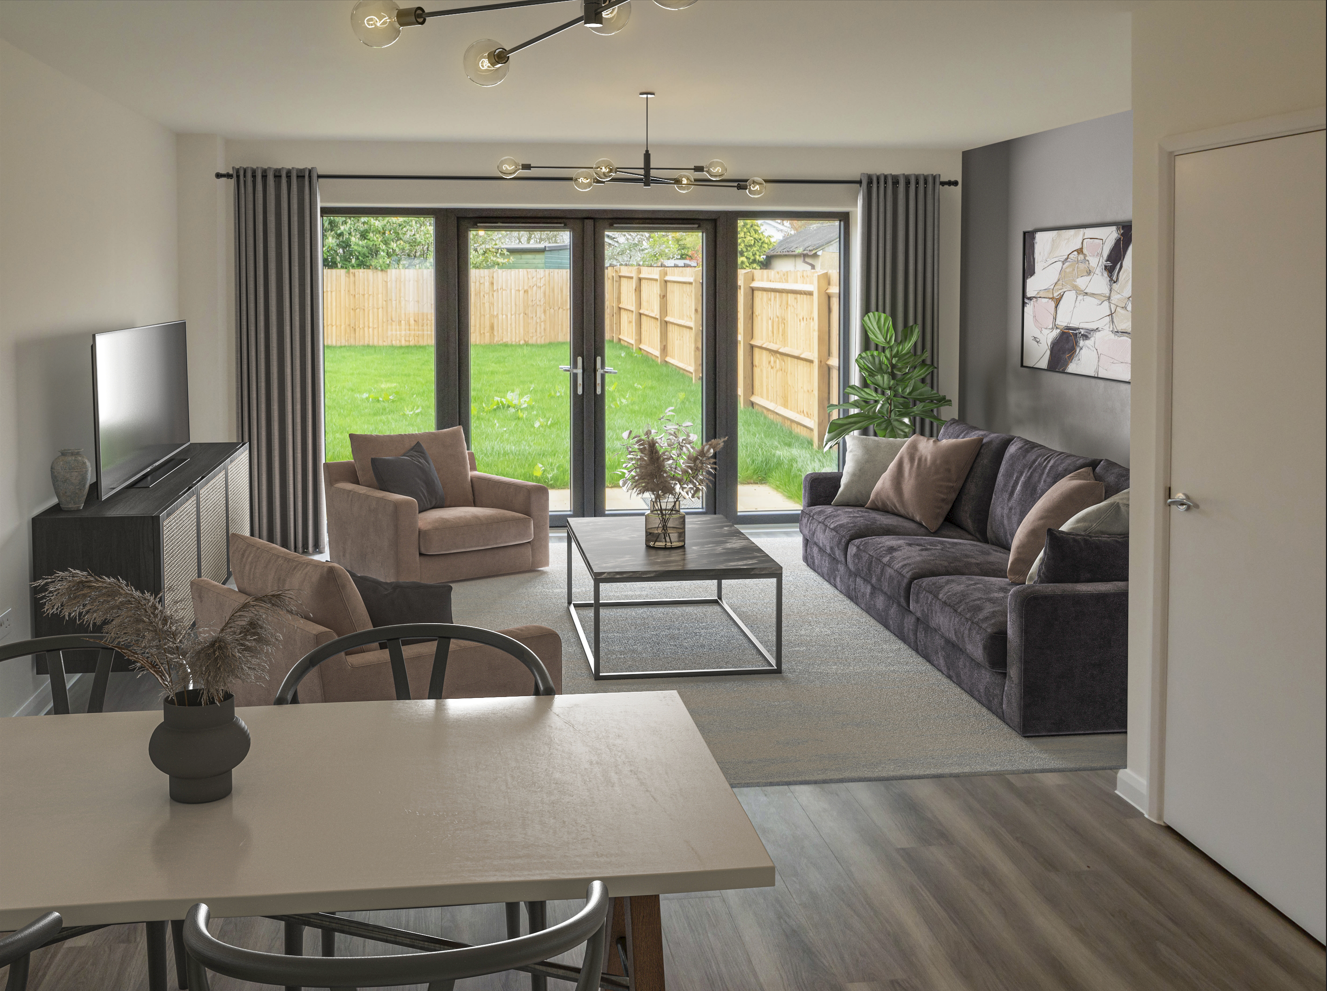 Image of living/dining area in Plot 3 Carter Meadows